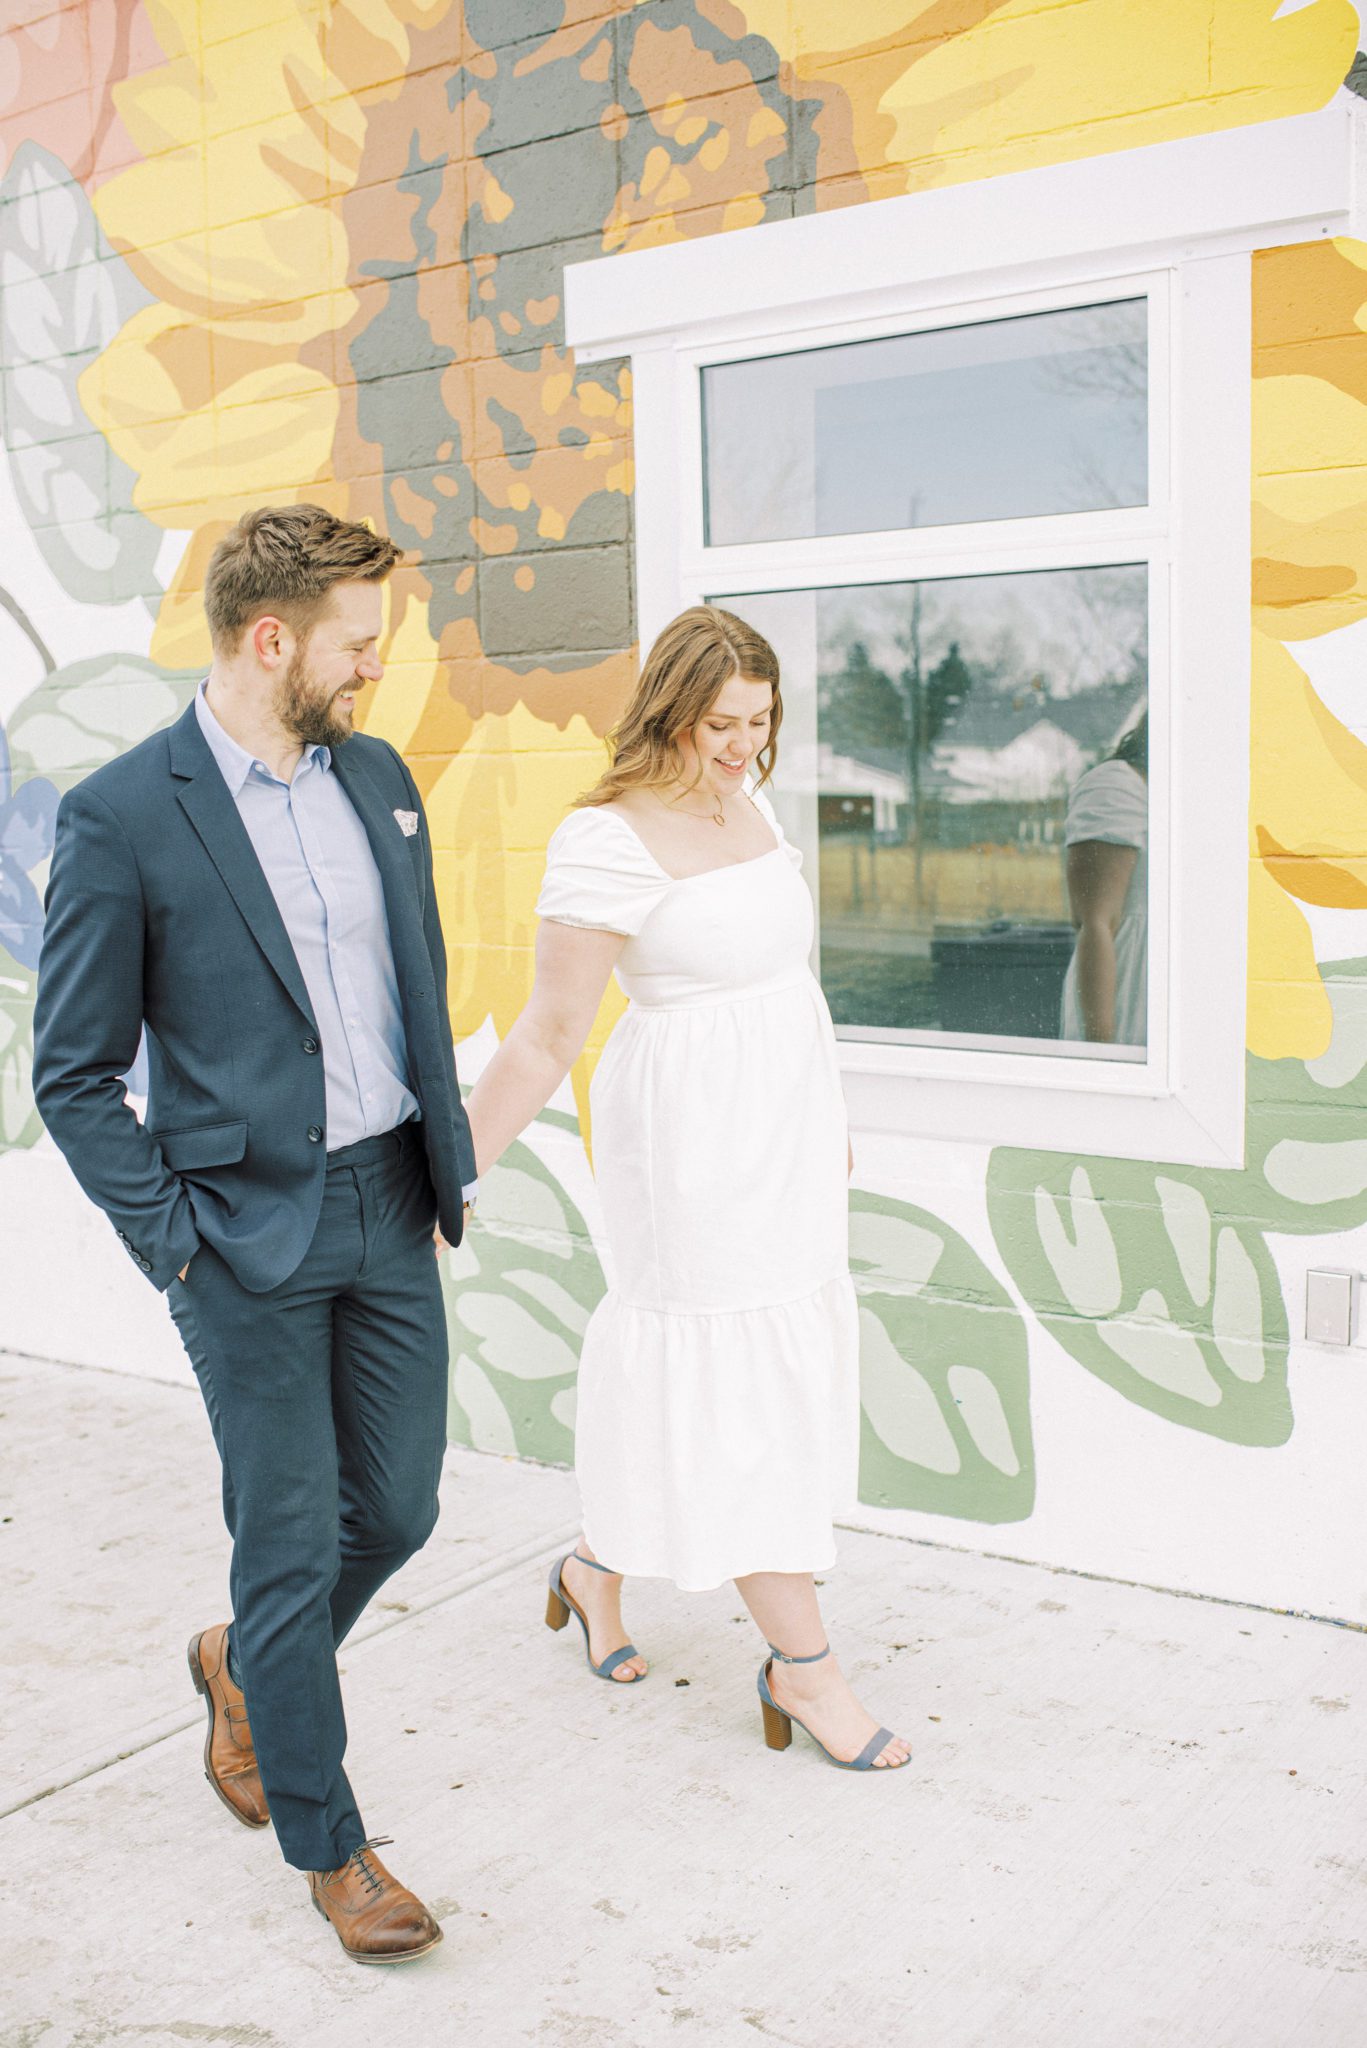 Sunflower wall art in Edmonton Alberta for an engagement session filled with props